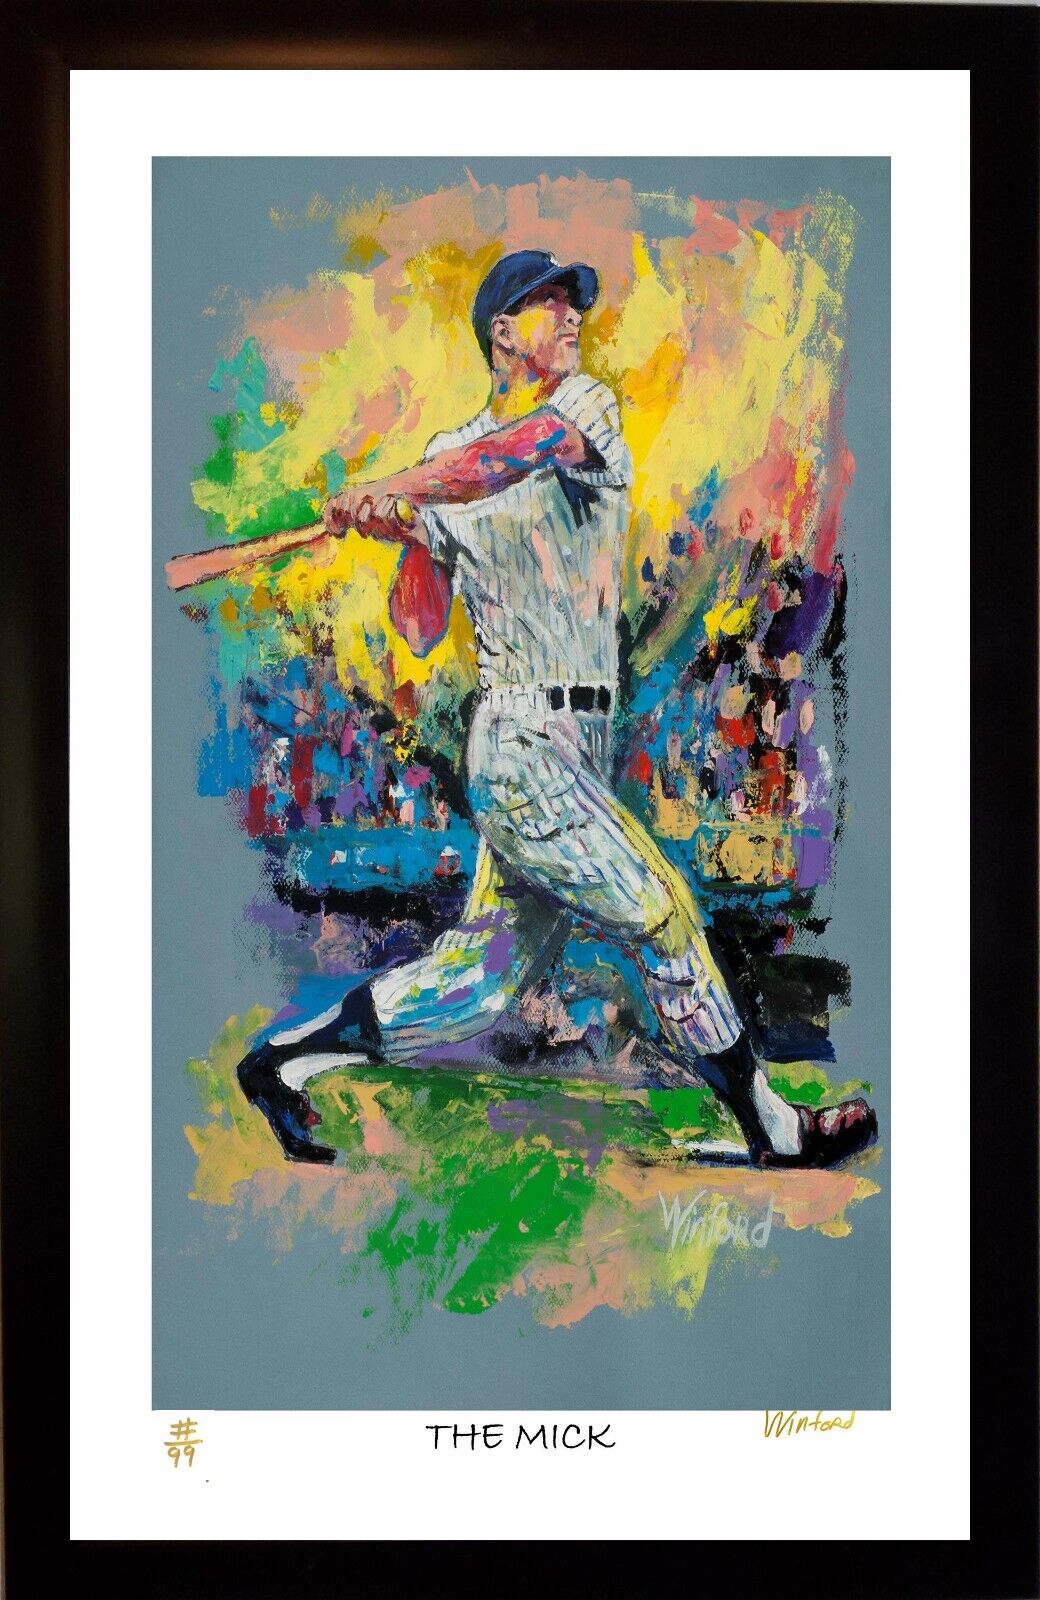 Sale MICKEY MANTLE L.E. Premium Art Print, By Winford Was 199.95 Now 149.95